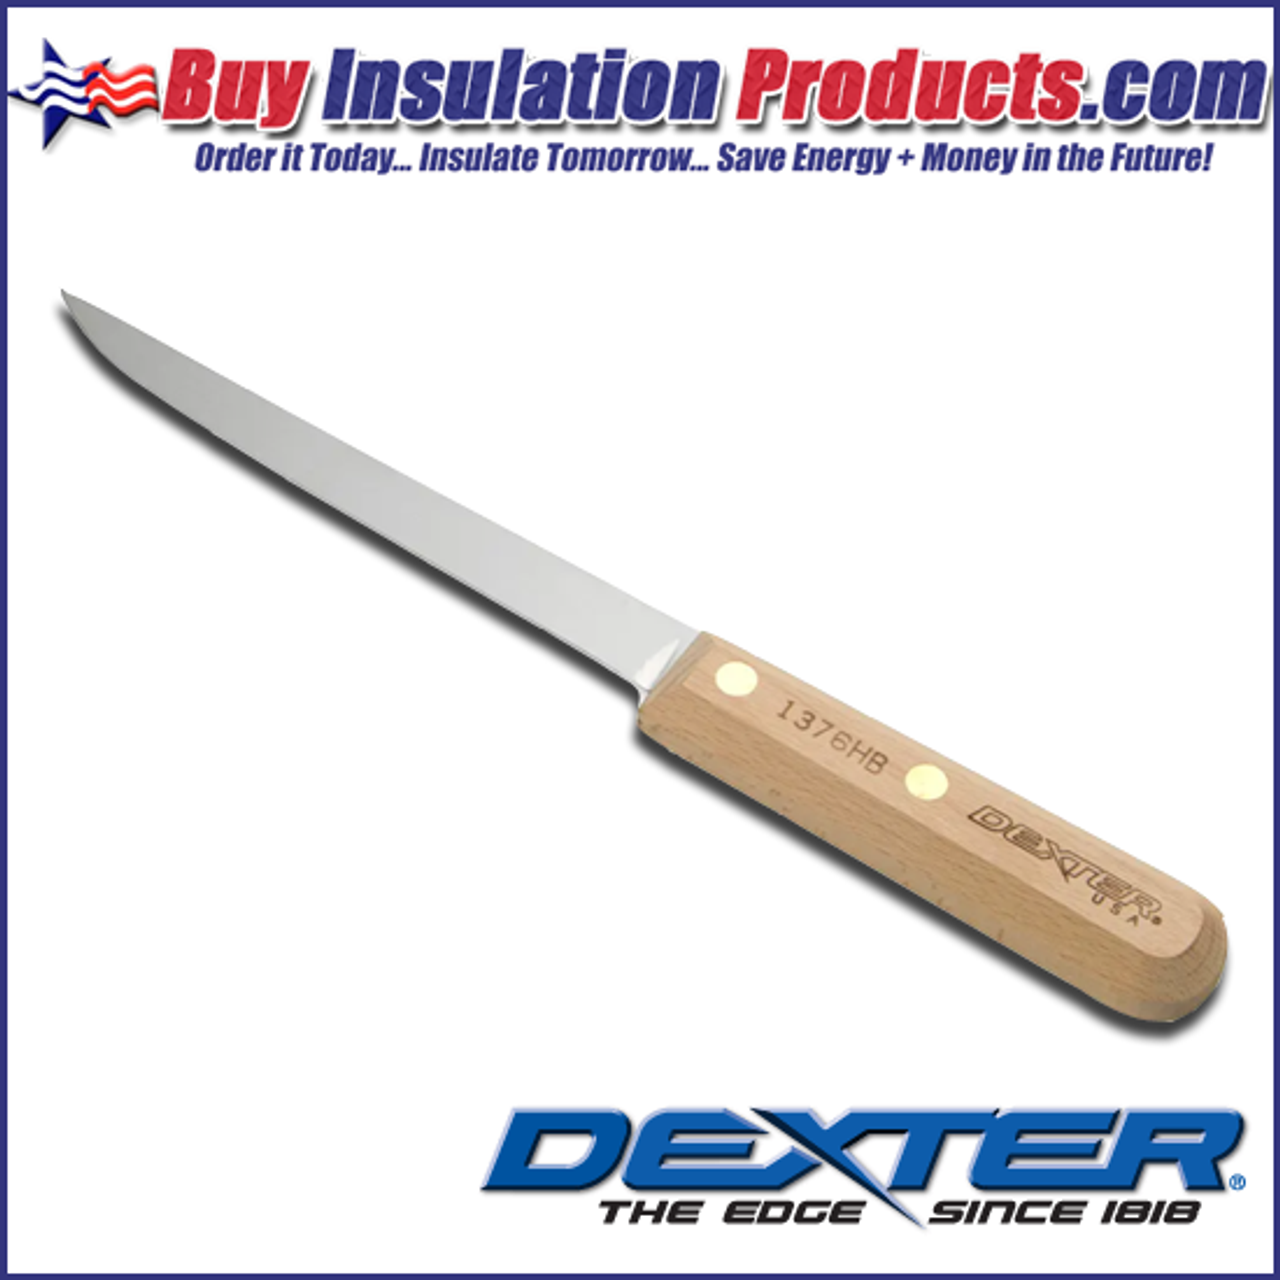 https://cdn11.bigcommerce.com/s-sjt5ll3s/images/stencil/1280x1280/products/105/3089/Dexter_Russell_1376HB_Insulation_Knife__75398.1687295238.png?c=2